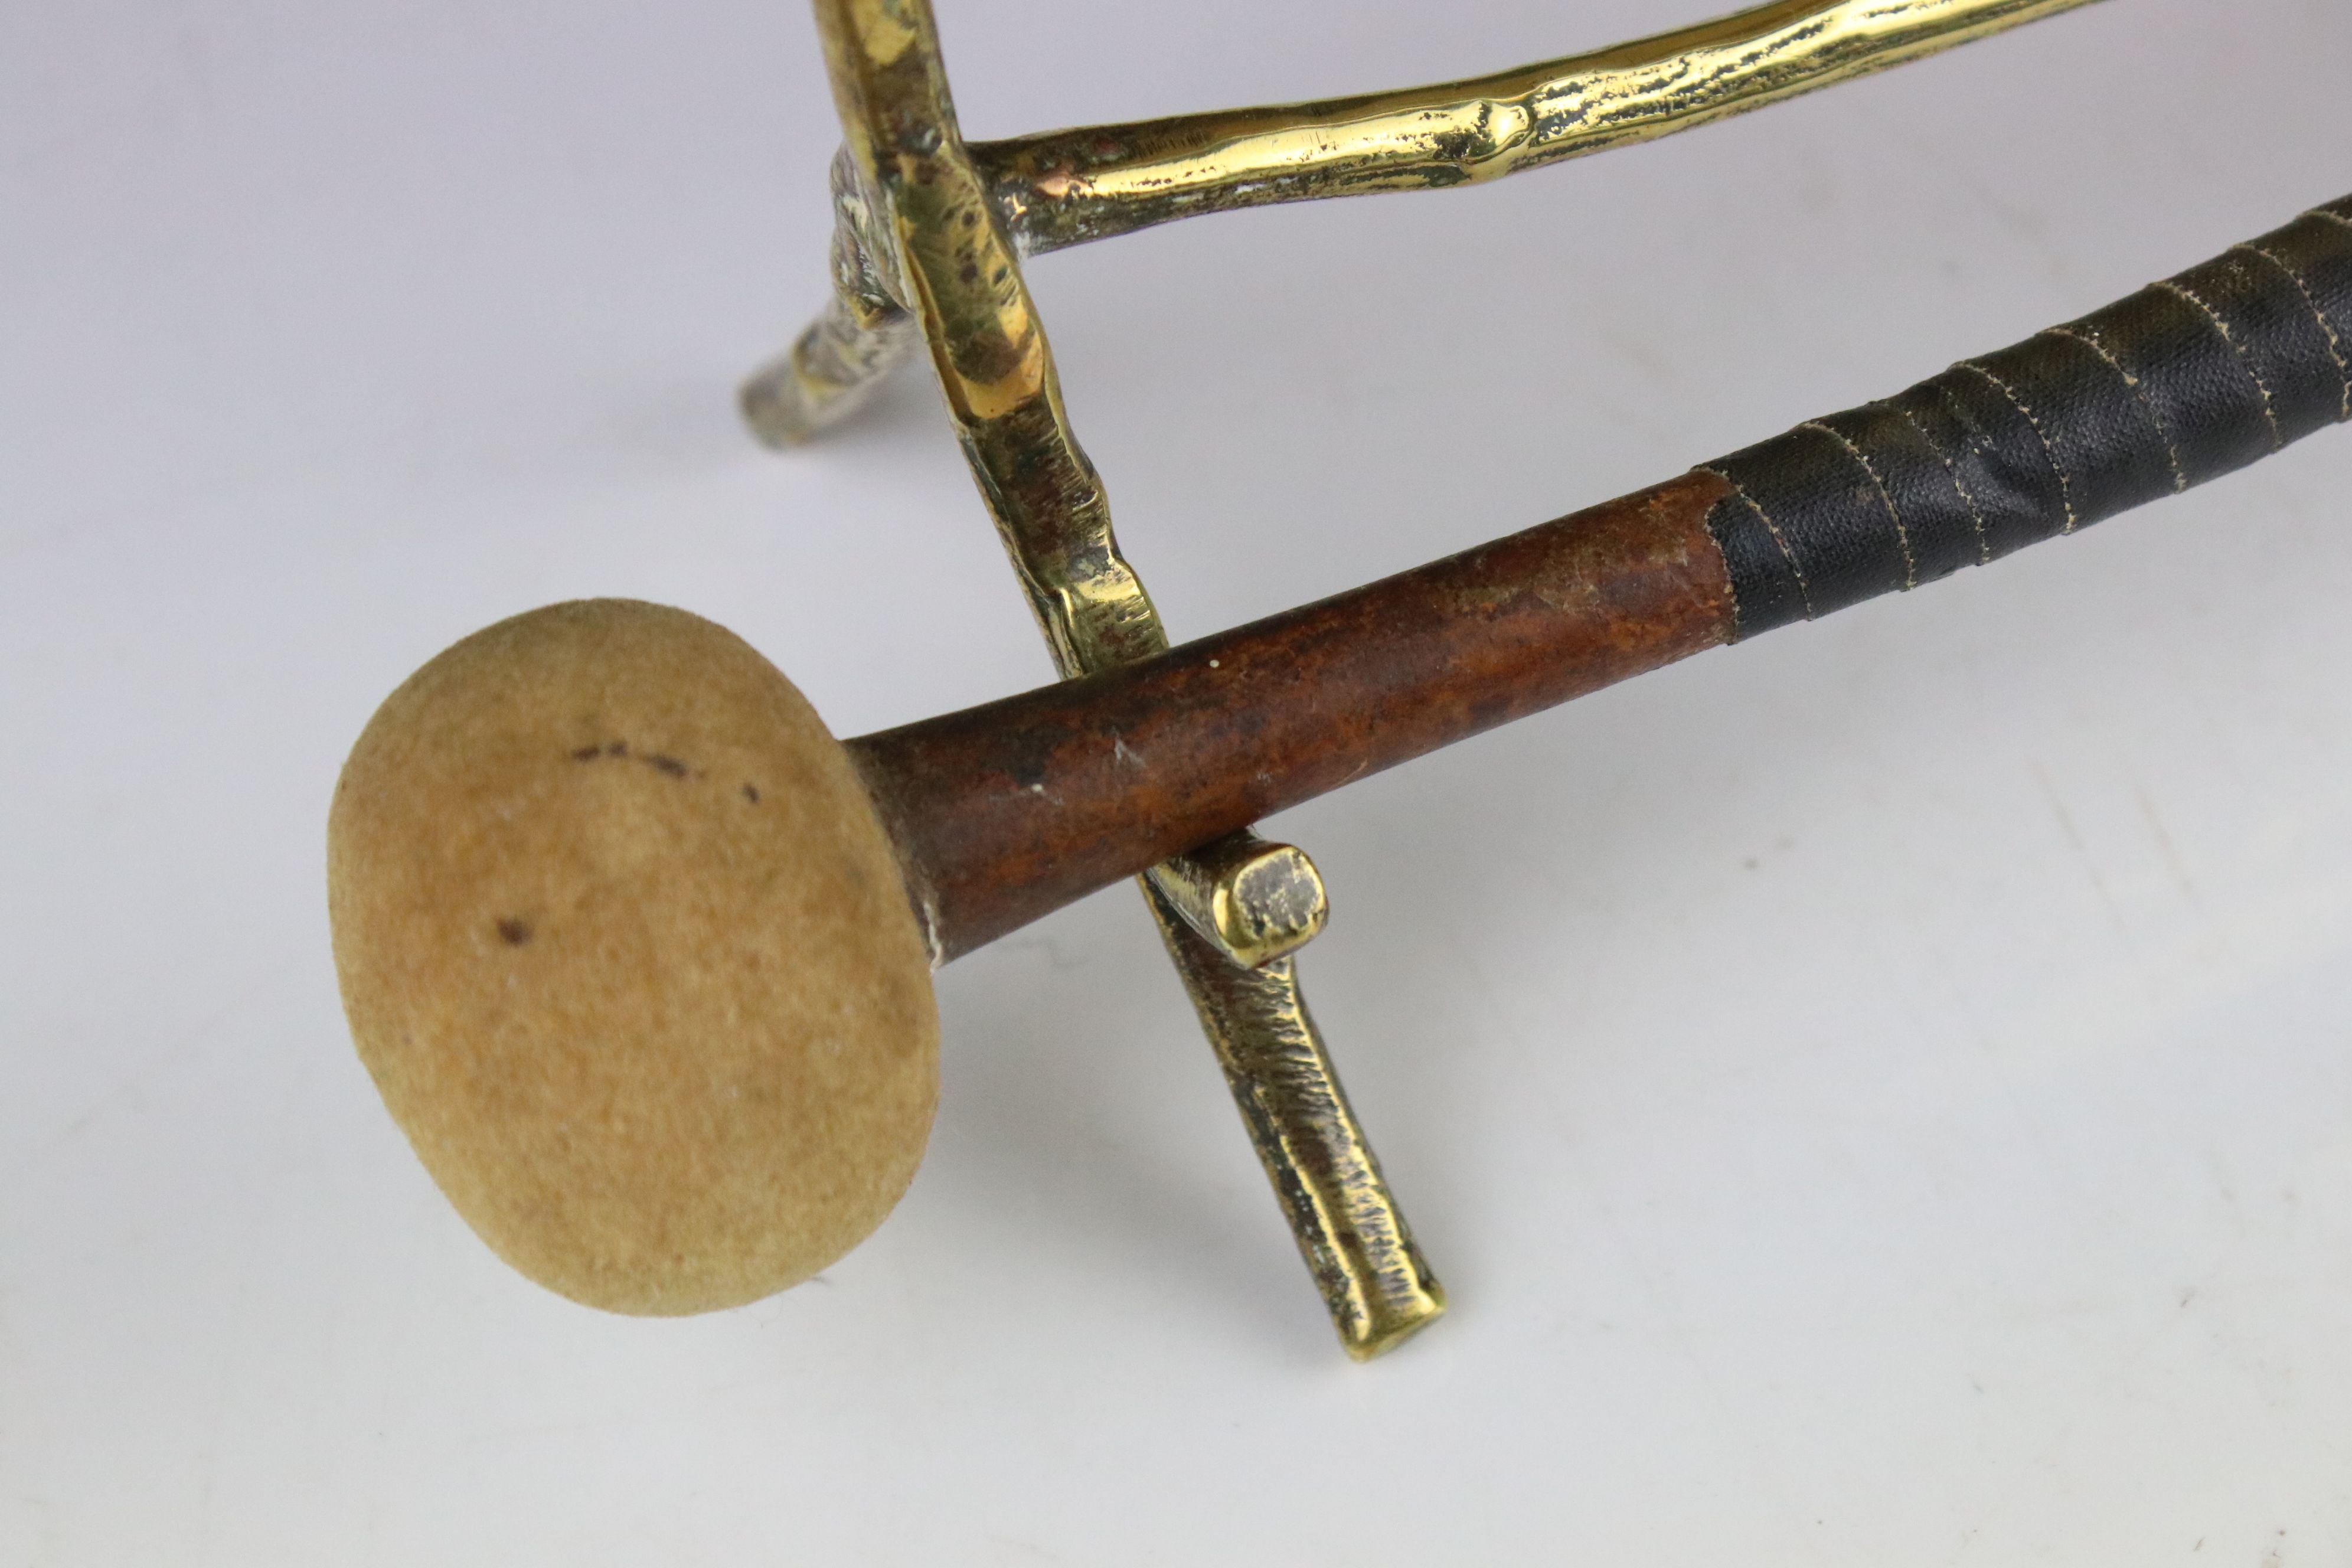 Early 20th century Brass Gong held on a stand of naturalistic form with a wooden handle striker, - Image 2 of 4